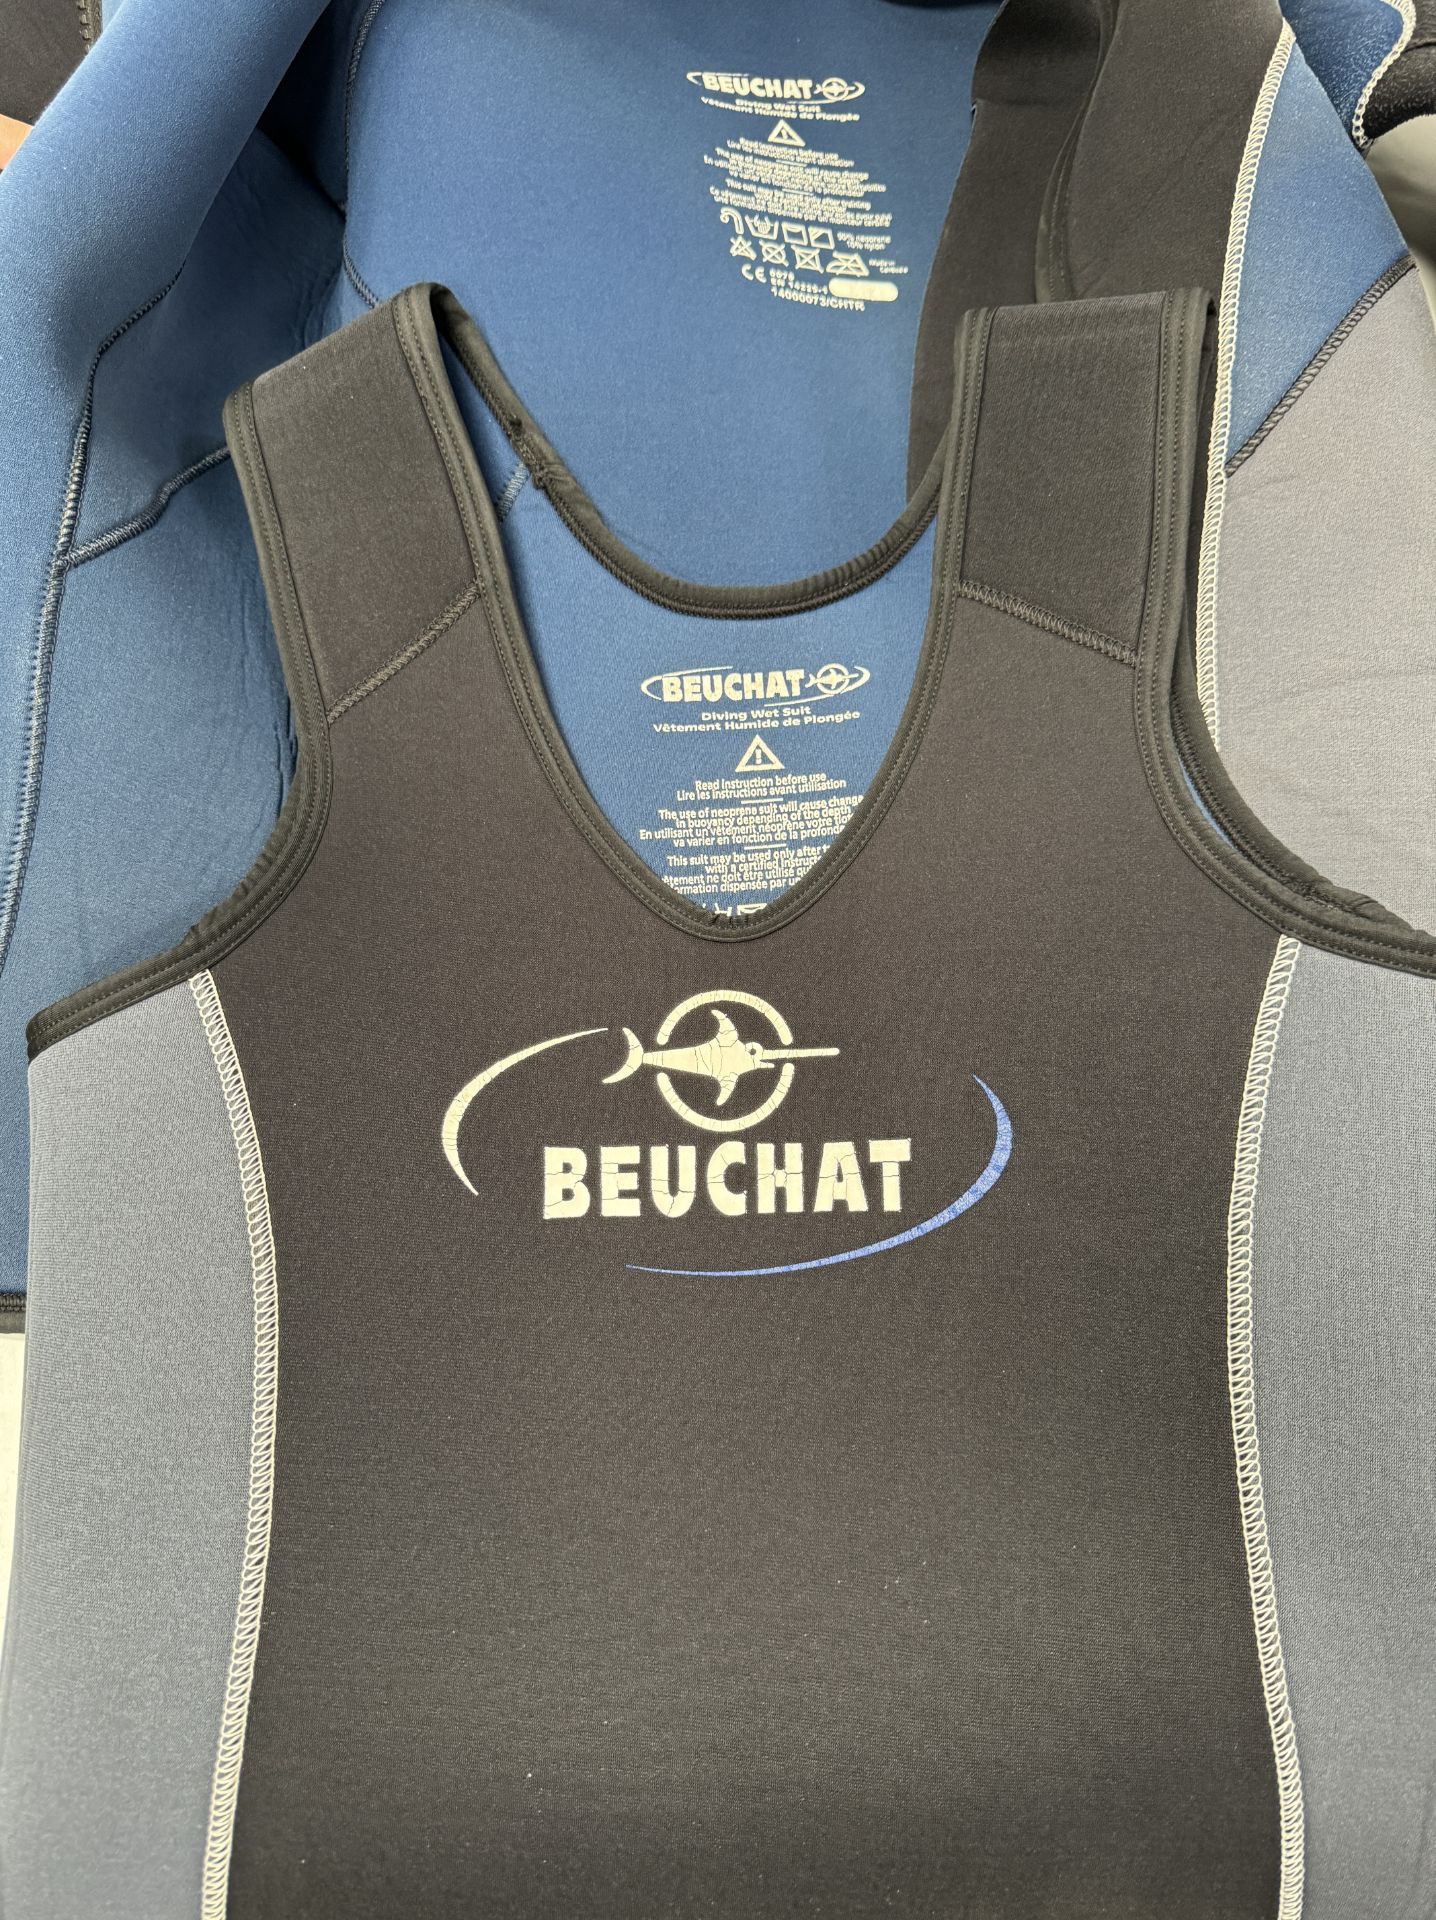 Six O’Neill, Beuchat, Seac Wetsuits (Location: Brentwood. Please Refer to General Notes) - Image 4 of 18